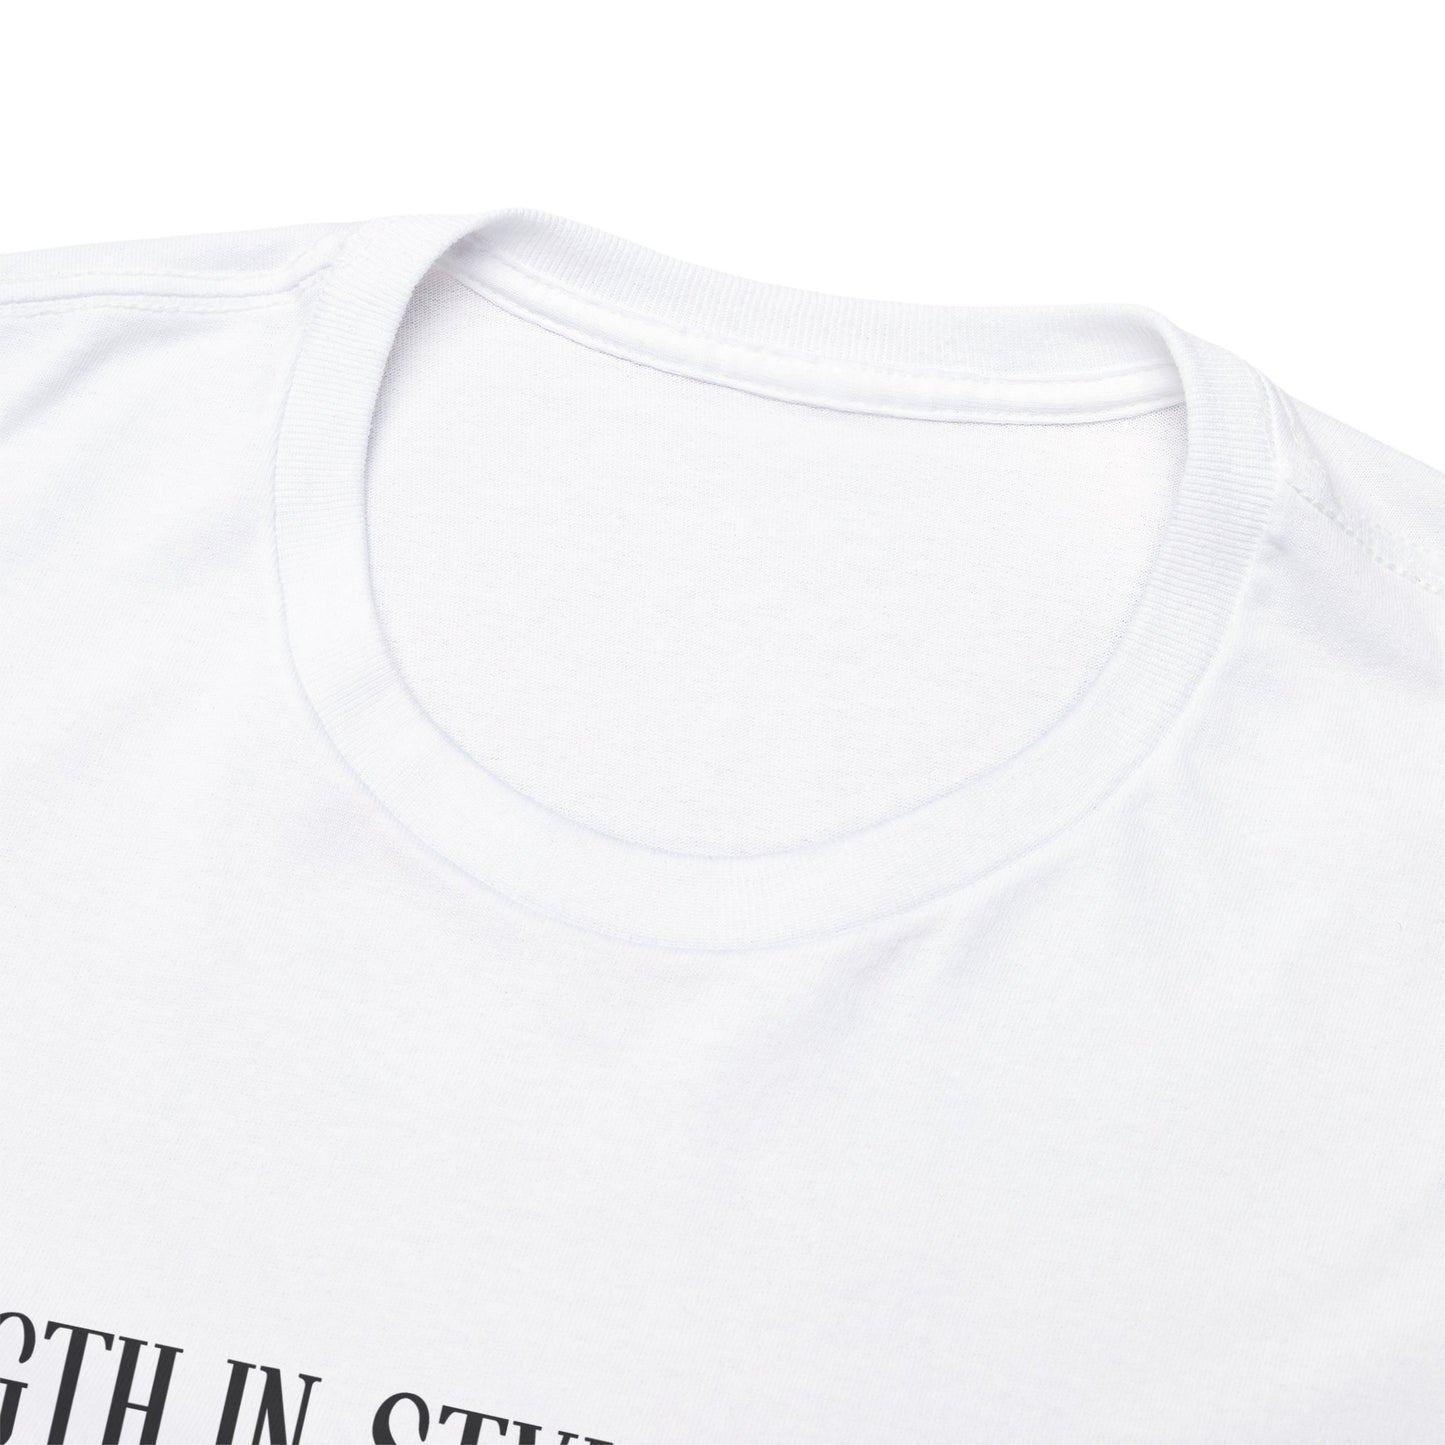 'Strength In Style' Heavy Cotton Tee